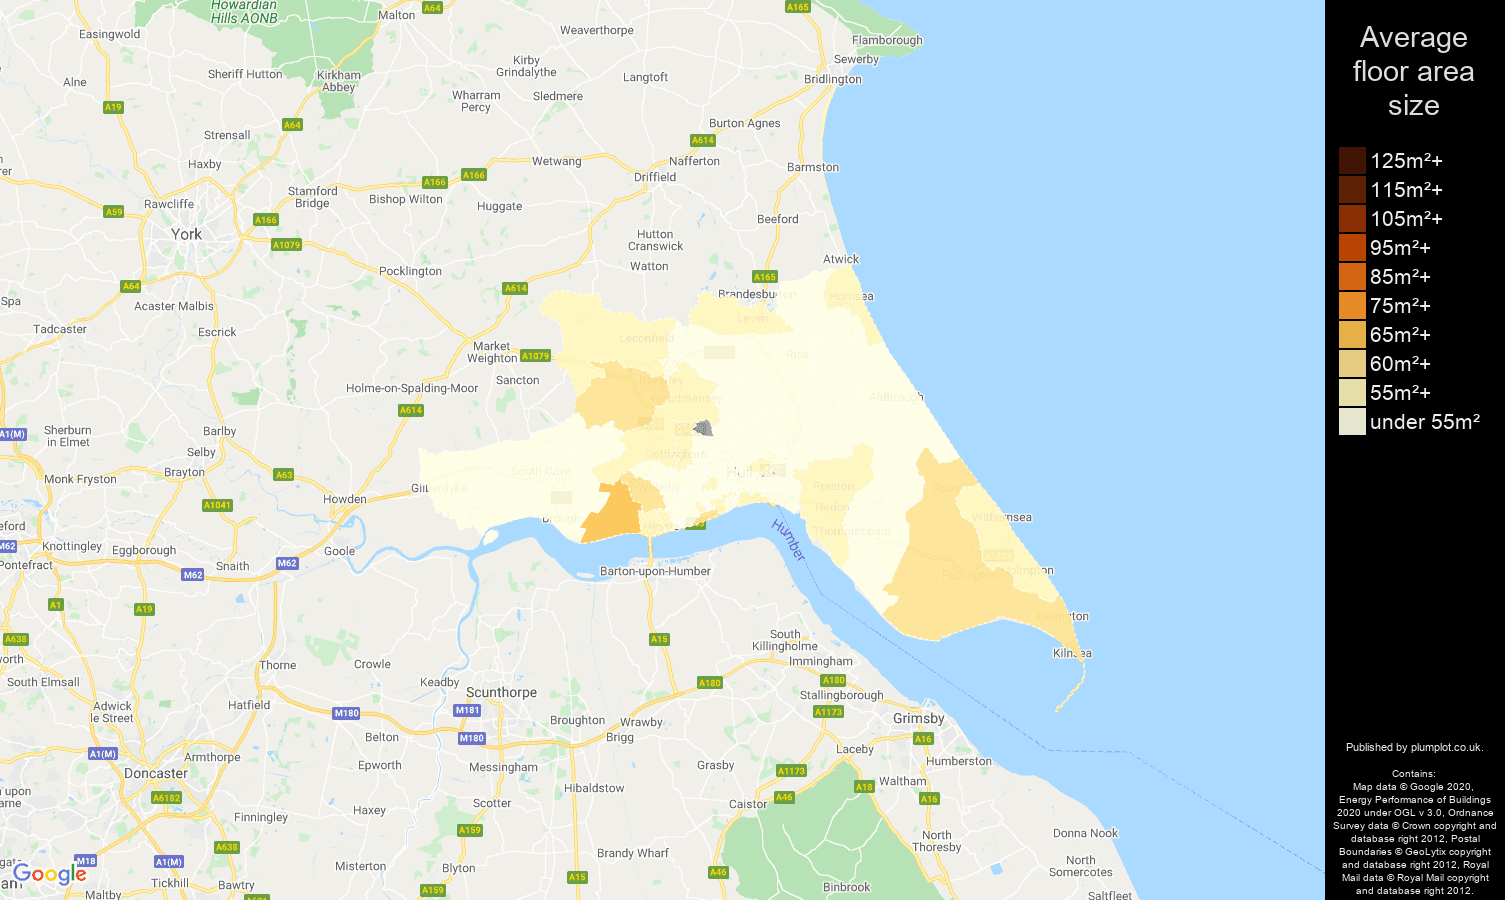 Hull map of average floor area size of flats